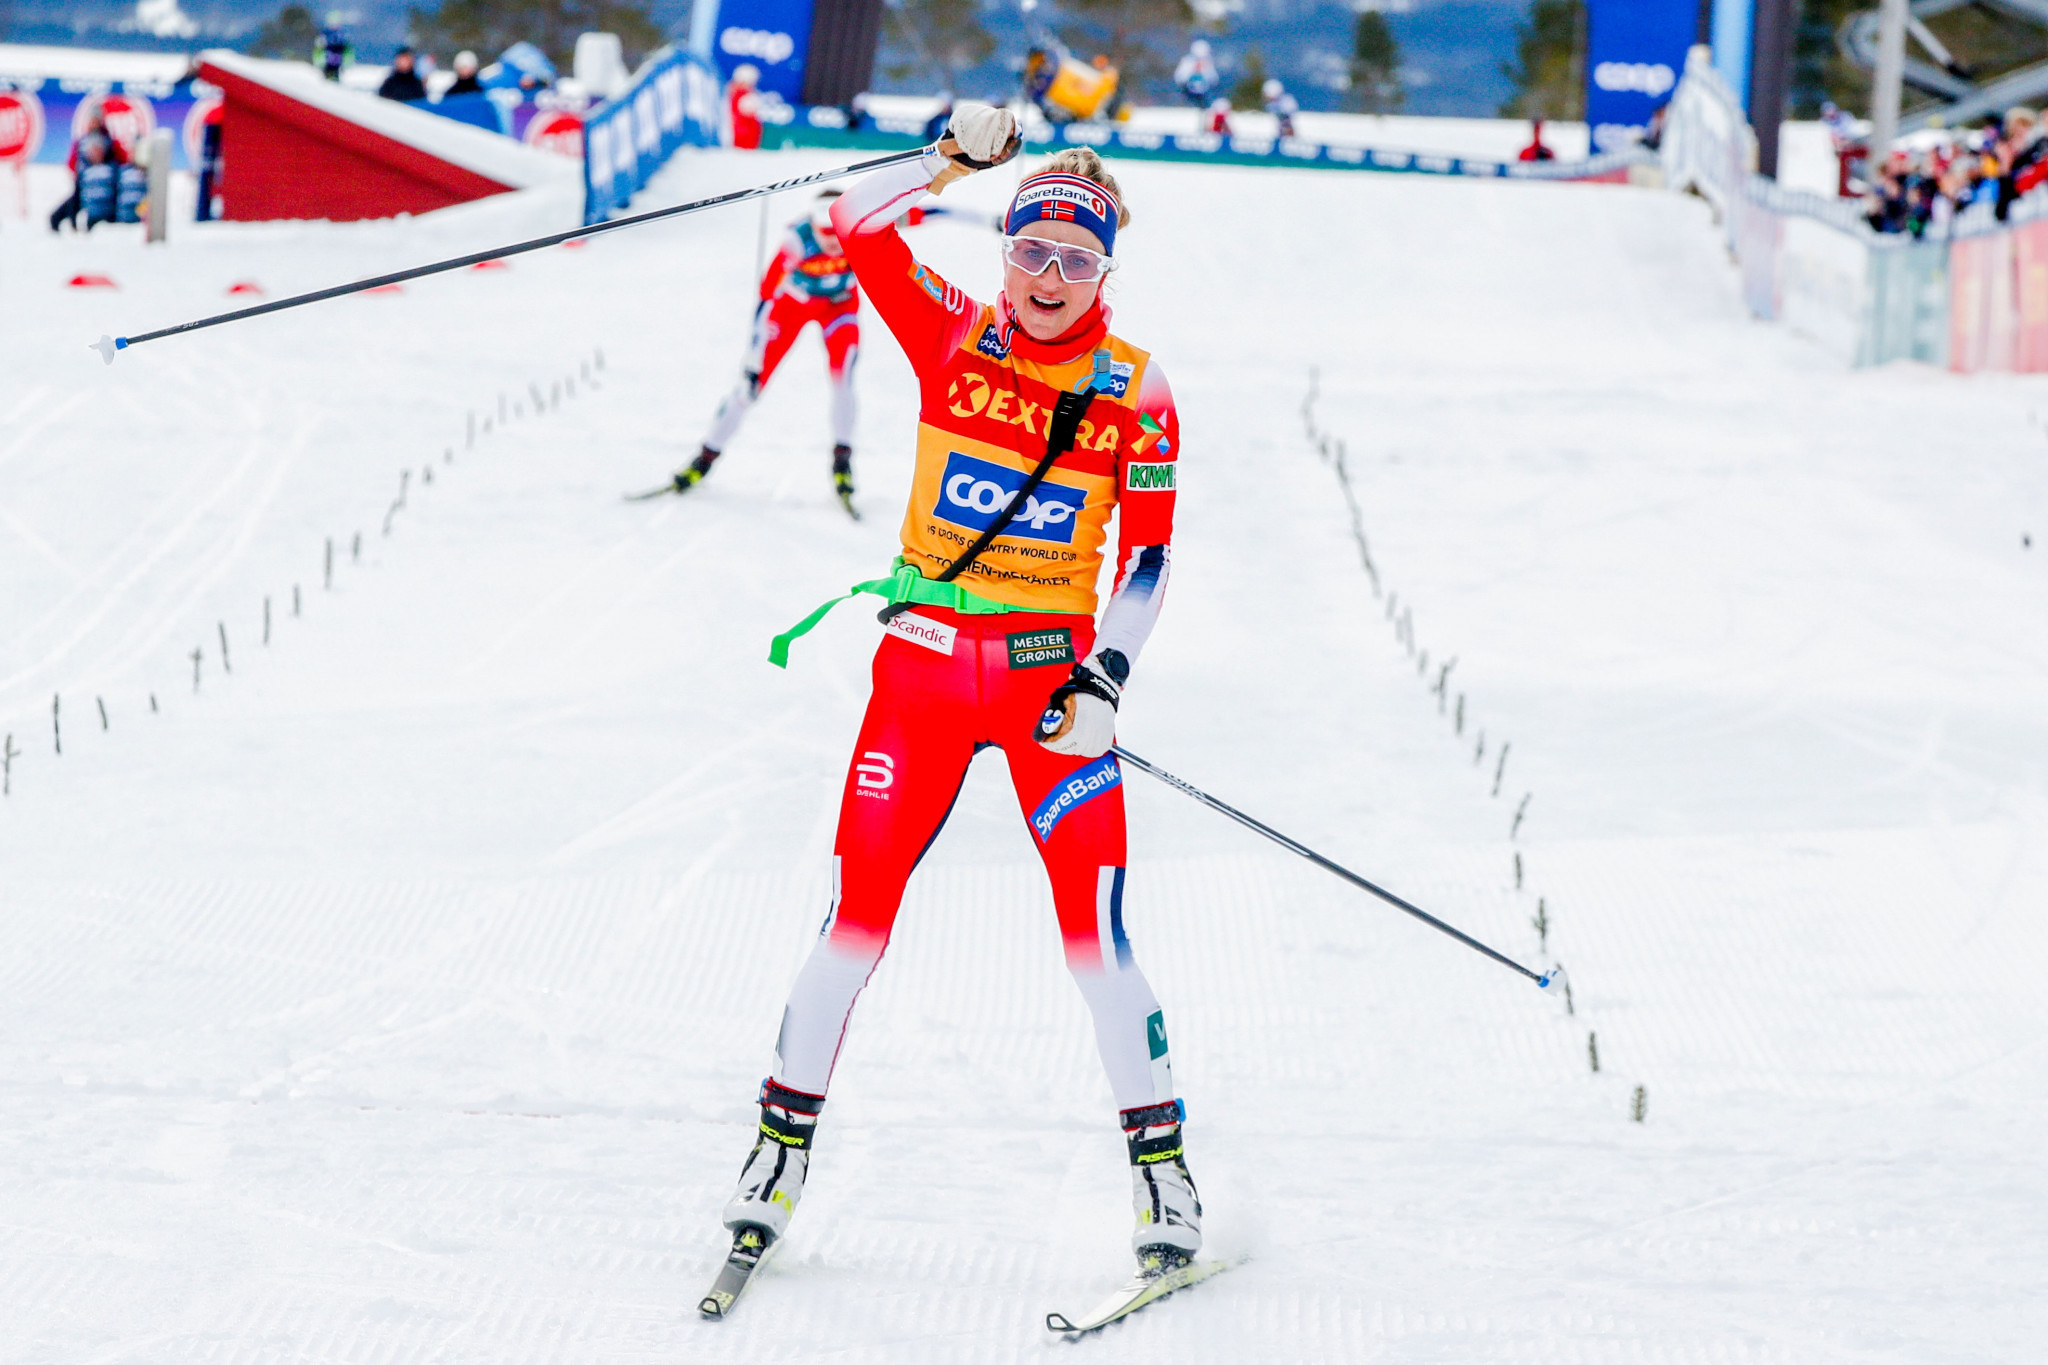 Therese Johaug won the Ski Tour title in Trondheim ©Getty Images